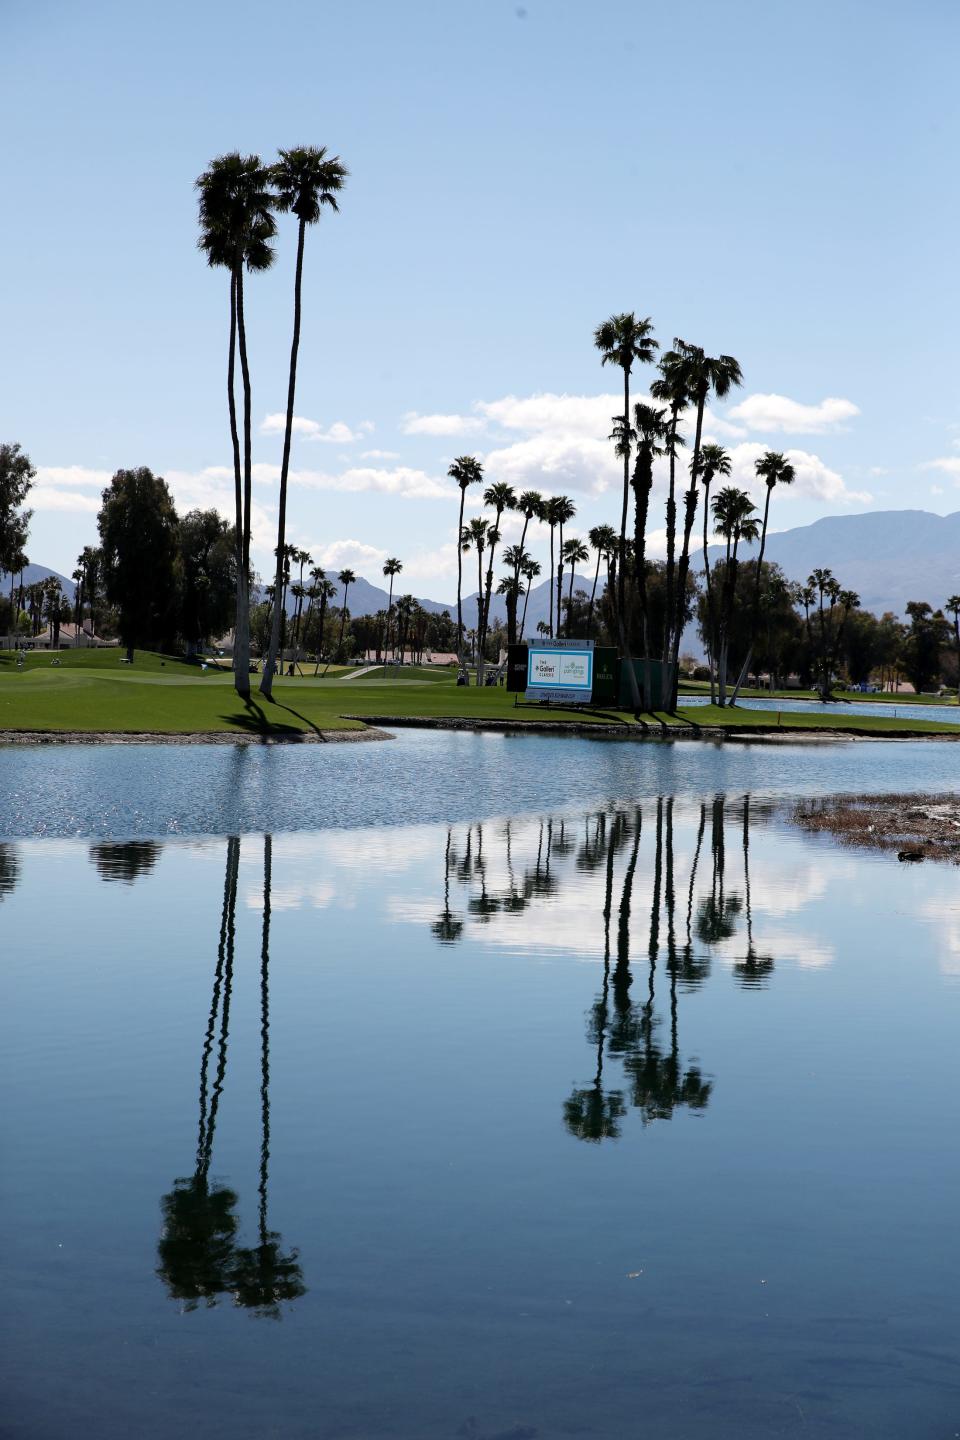 Palm trees and clouds are reflected in the pond near the 18th green at Mission Hills Country Club.